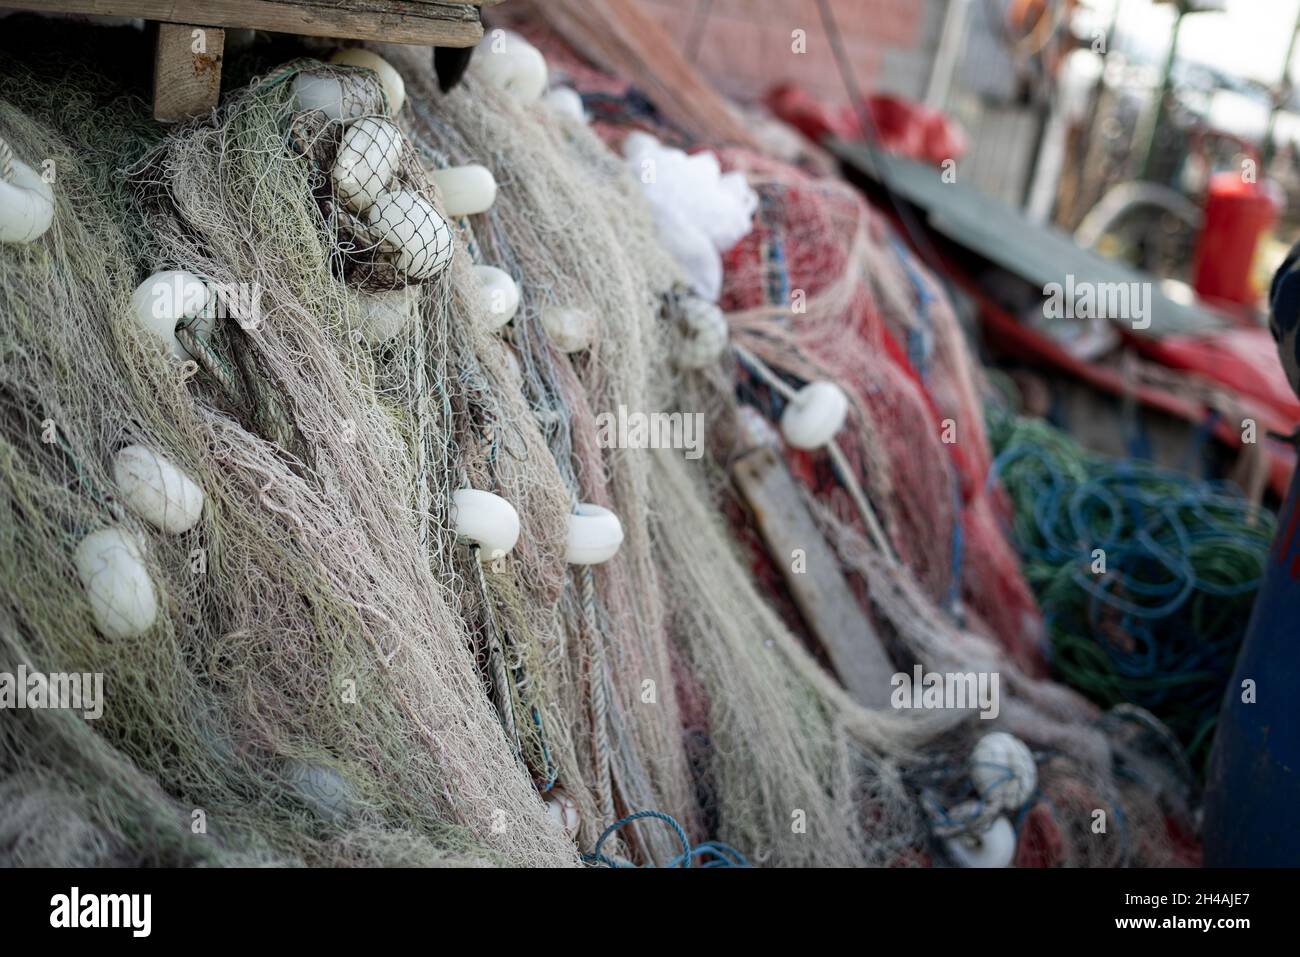 https://c8.alamy.com/comp/2H4AJE7/stacked-fishing-nets-and-ropes-red-green-blue-and-white-2H4AJE7.jpg